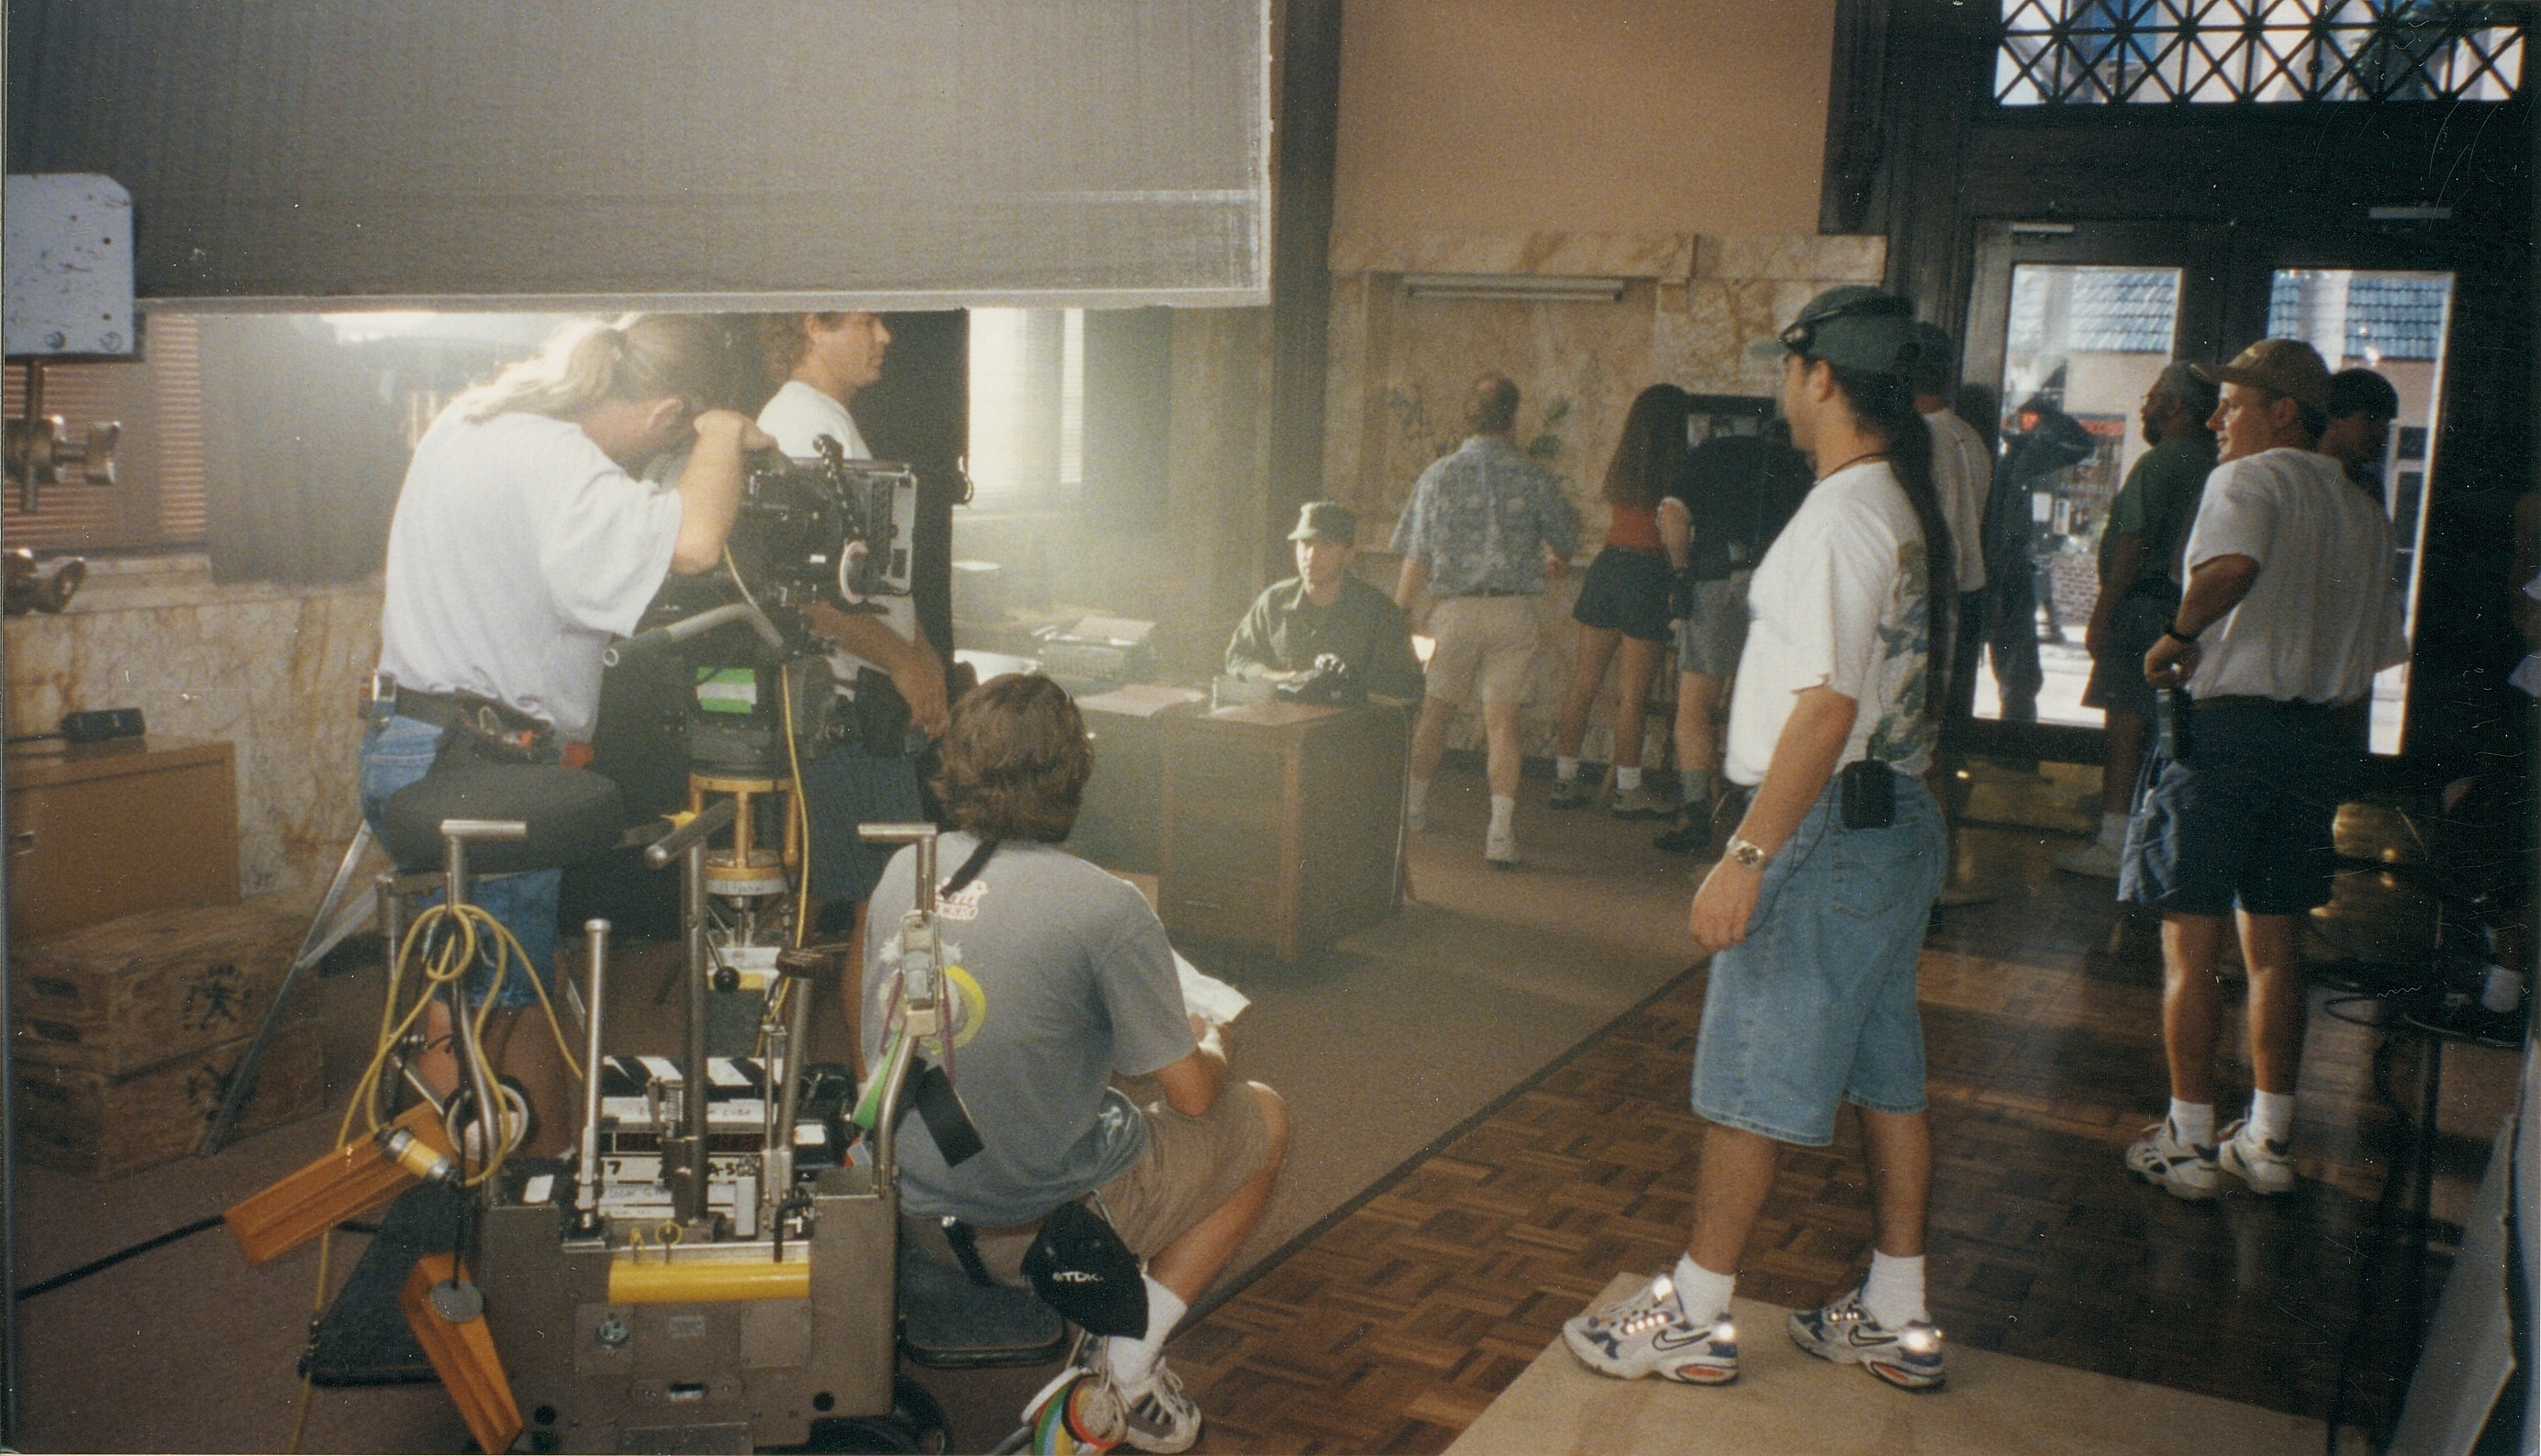 Tom Logan (back of head) directing on the set of ESCAPE FROM CUBA.